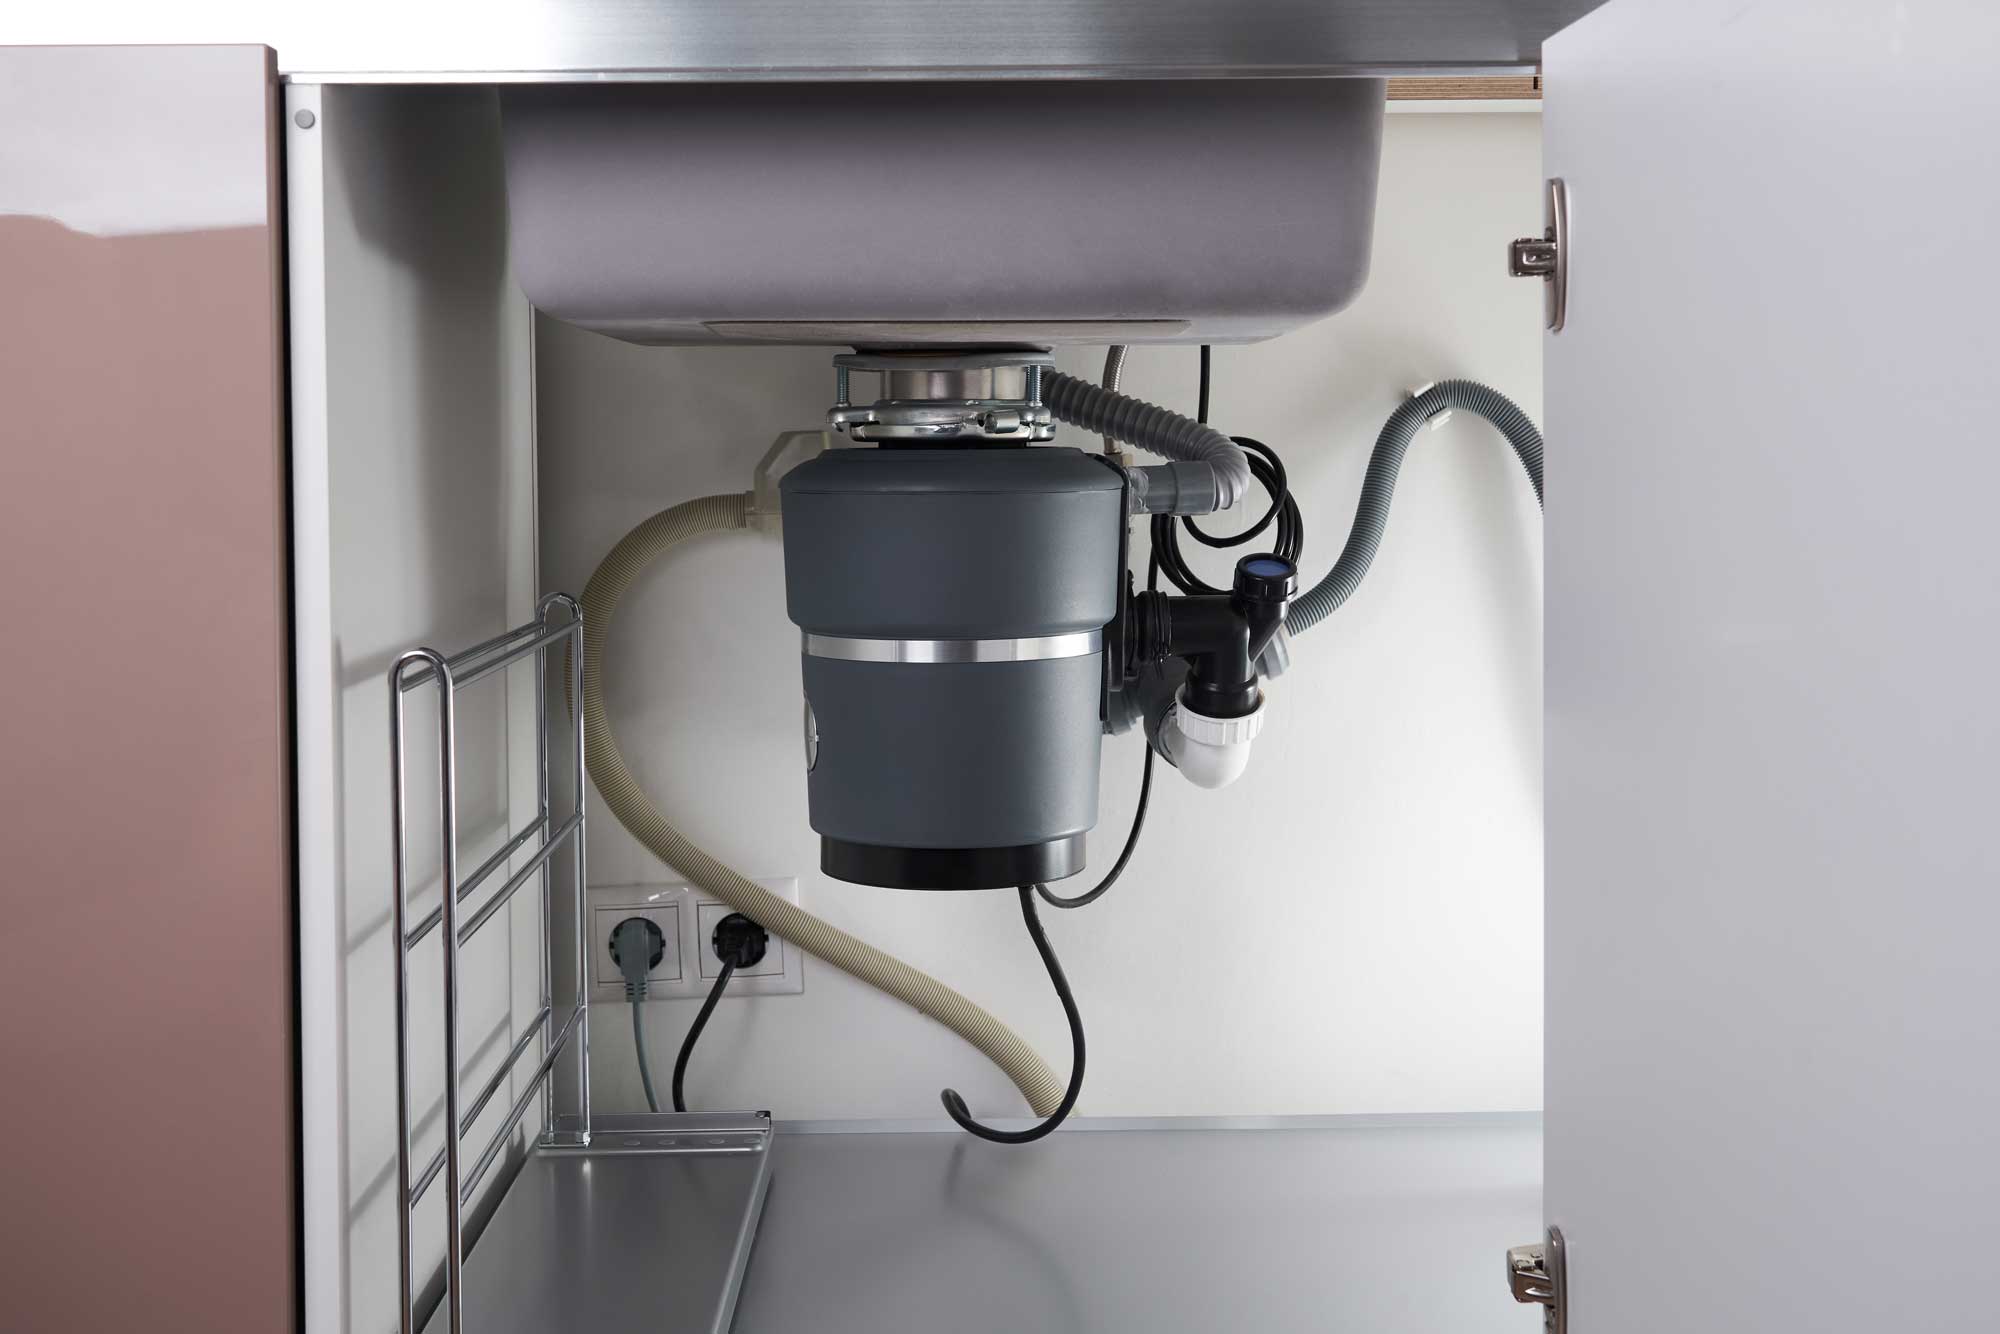 Is It Time to Upgrade Your Garbage Disposal? Recognizing the Telltale Signs